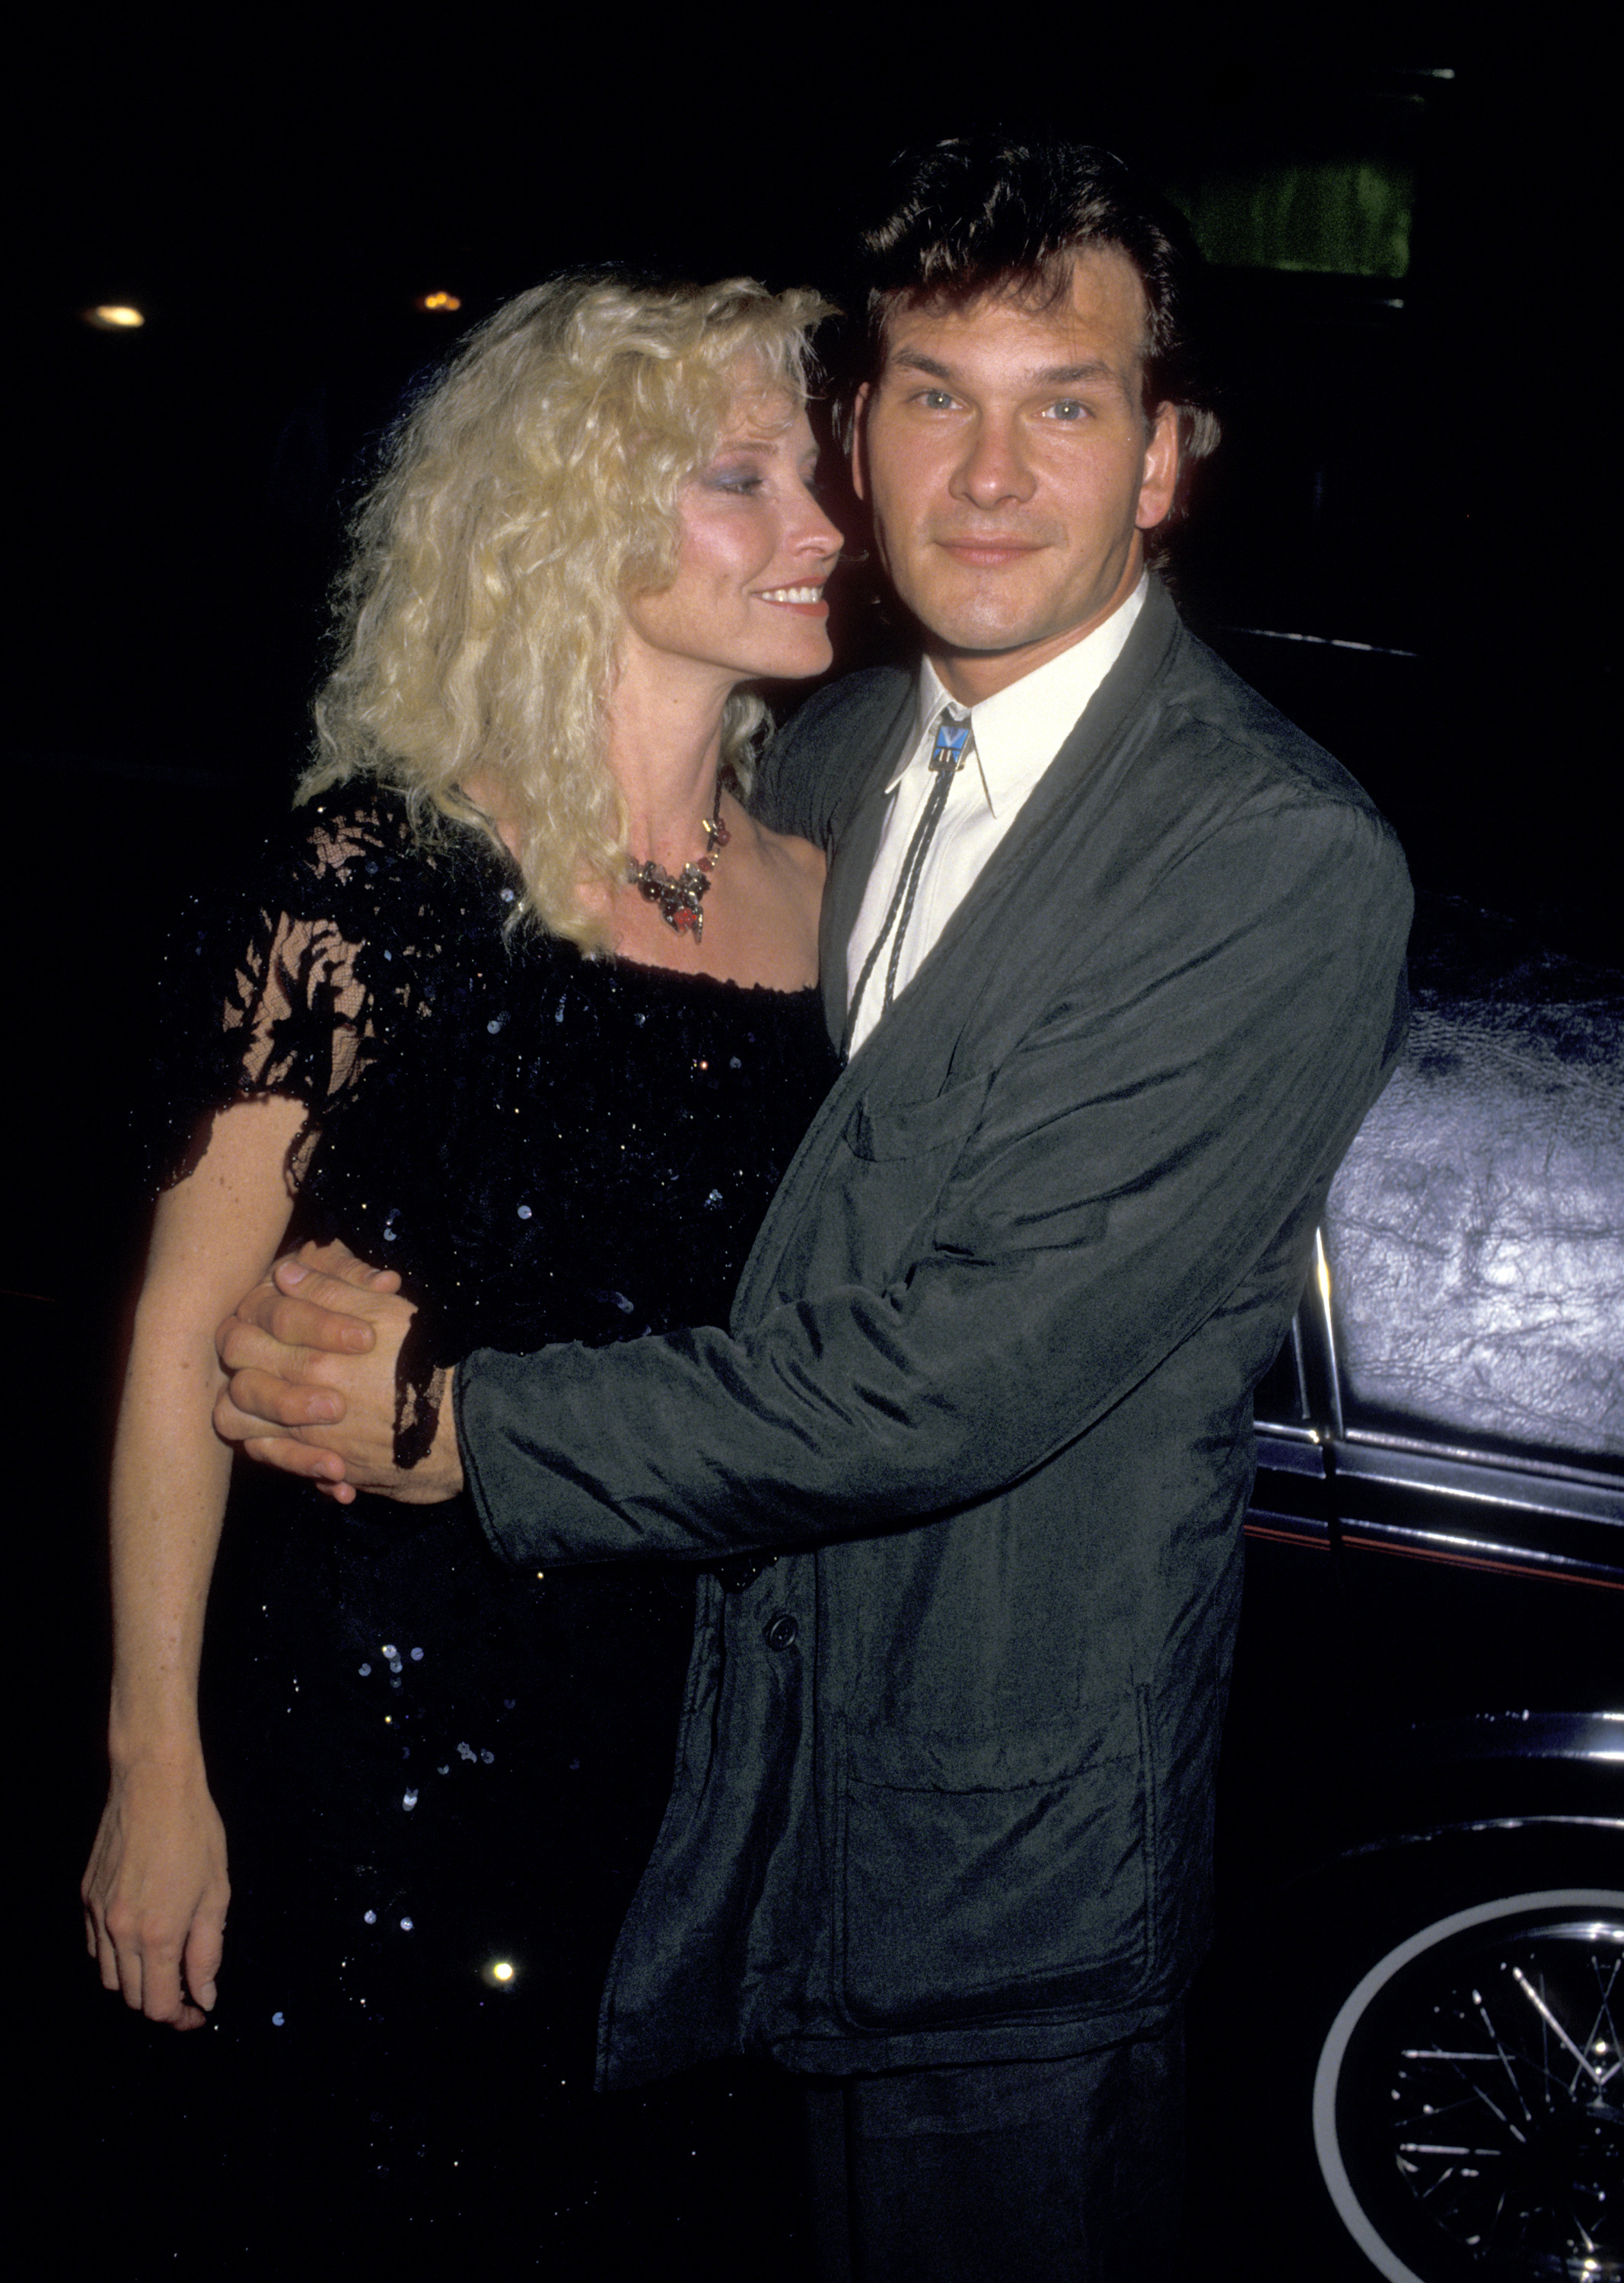 Lisa Niemi and Patrick Swayze at the premiere of "Dirty Dancing" on August 17, 1987 at the Gemini Theater in New York City | Source: Getty Images